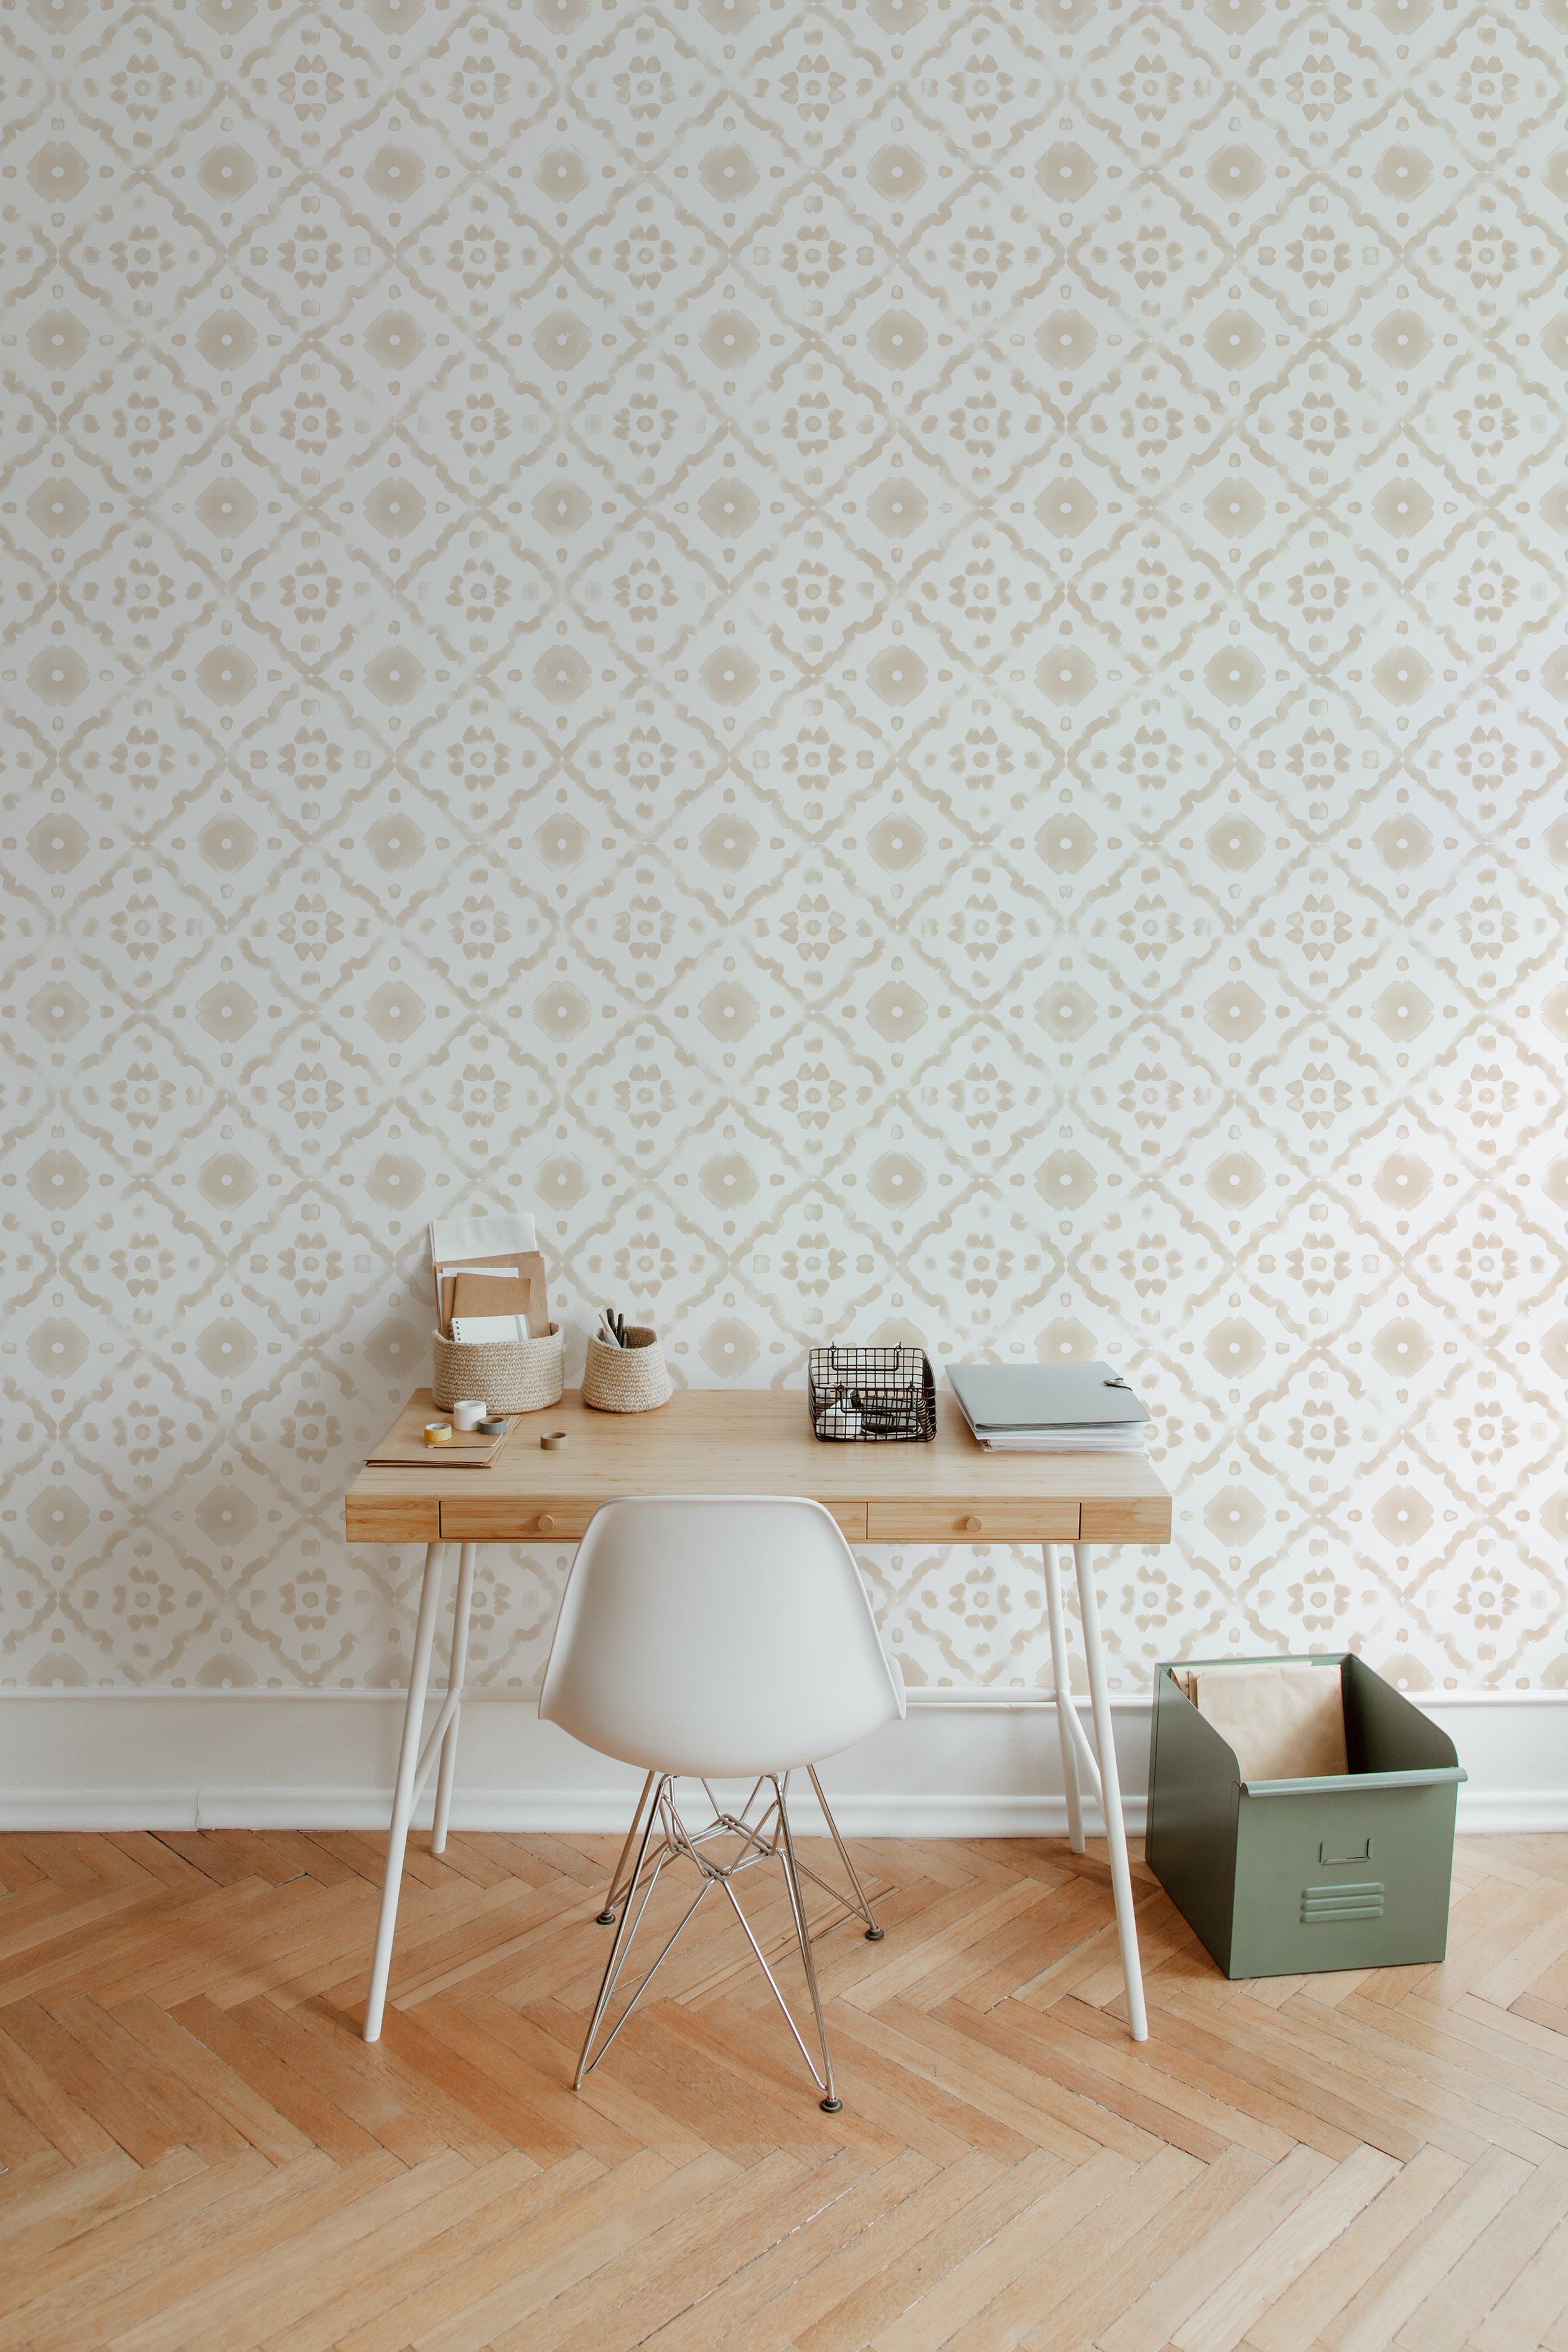 A minimalistic home office setup featuring Euclid Wallpaper with a subtle geometric pattern of cream motifs on a light beige background. The workspace includes a wooden desk, a modern white chair, and various office supplies neatly organized, creating a serene and productive environment.